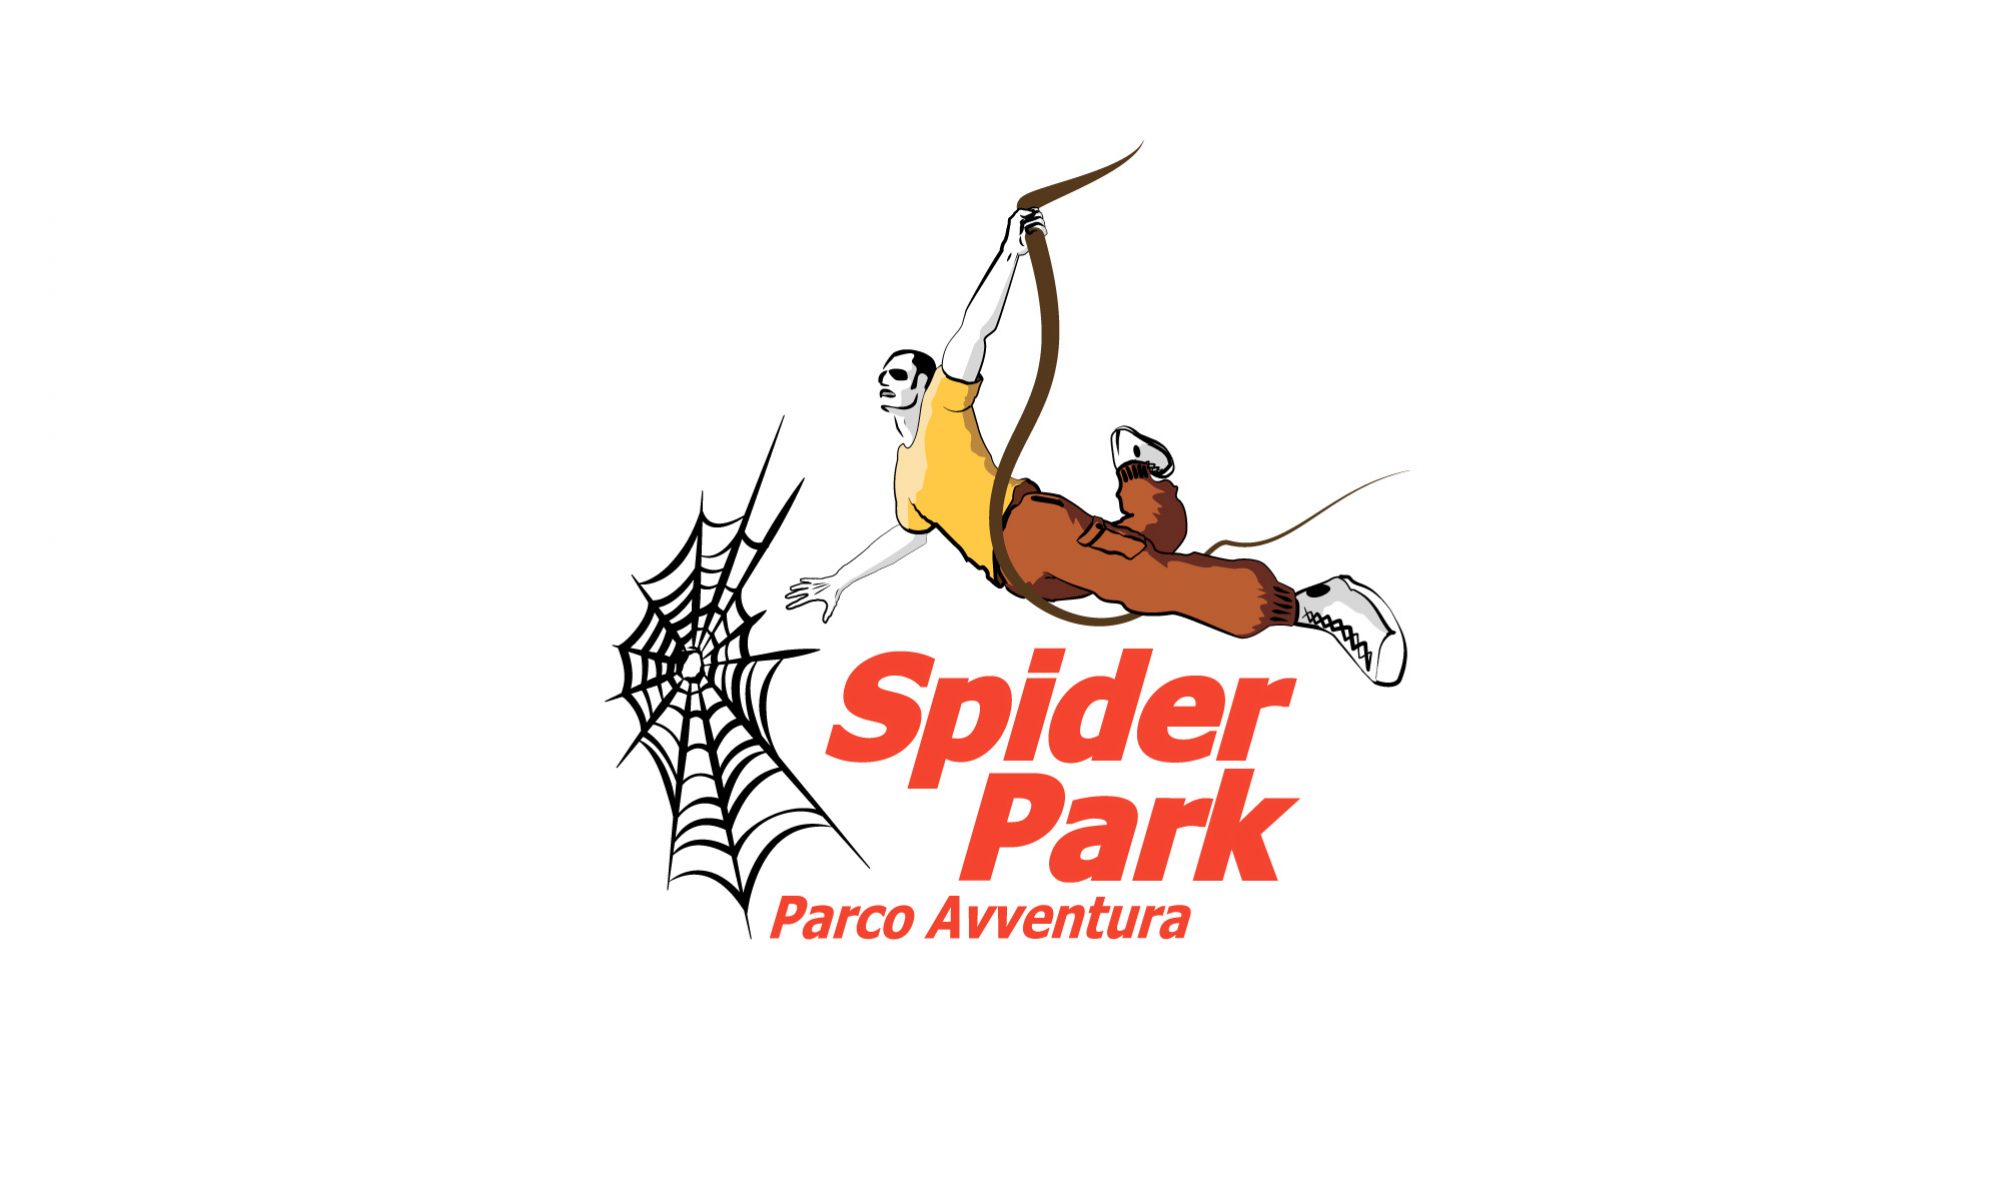 Spiderpark